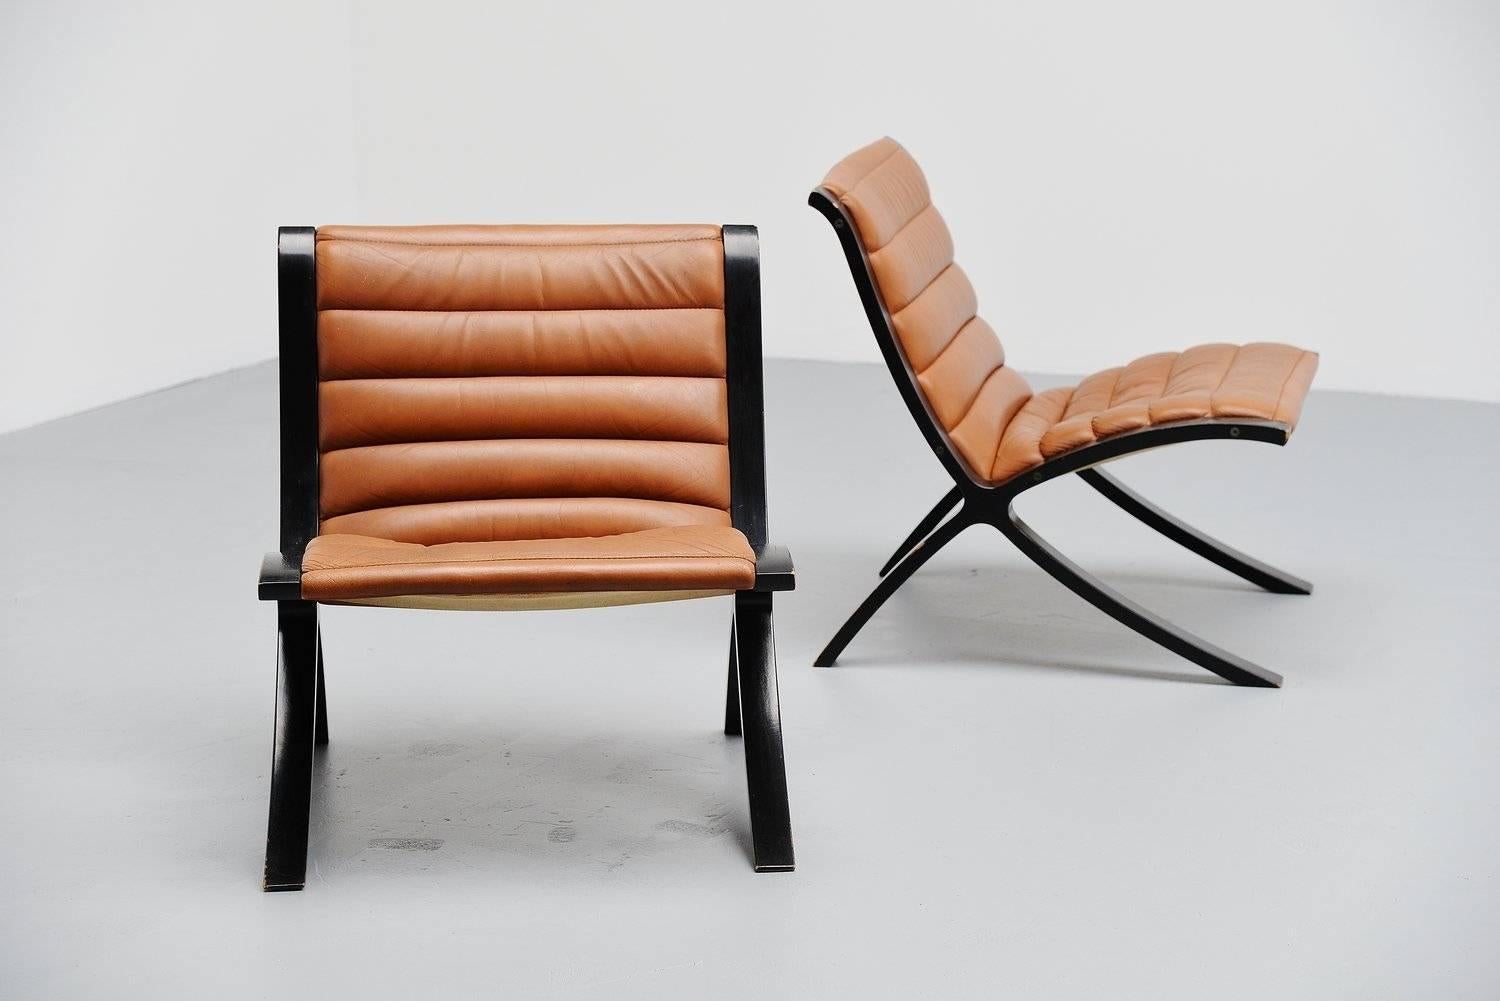 Nice pair of easy chairs model X-chair designed by Peter Hvidt & Orla Mølgaard Nielsen for Fritz Hansen, Denmark, 1979. These chairs have a black lacquered beech wooden frame and brown leather seats. The chairs are in original condition, there is